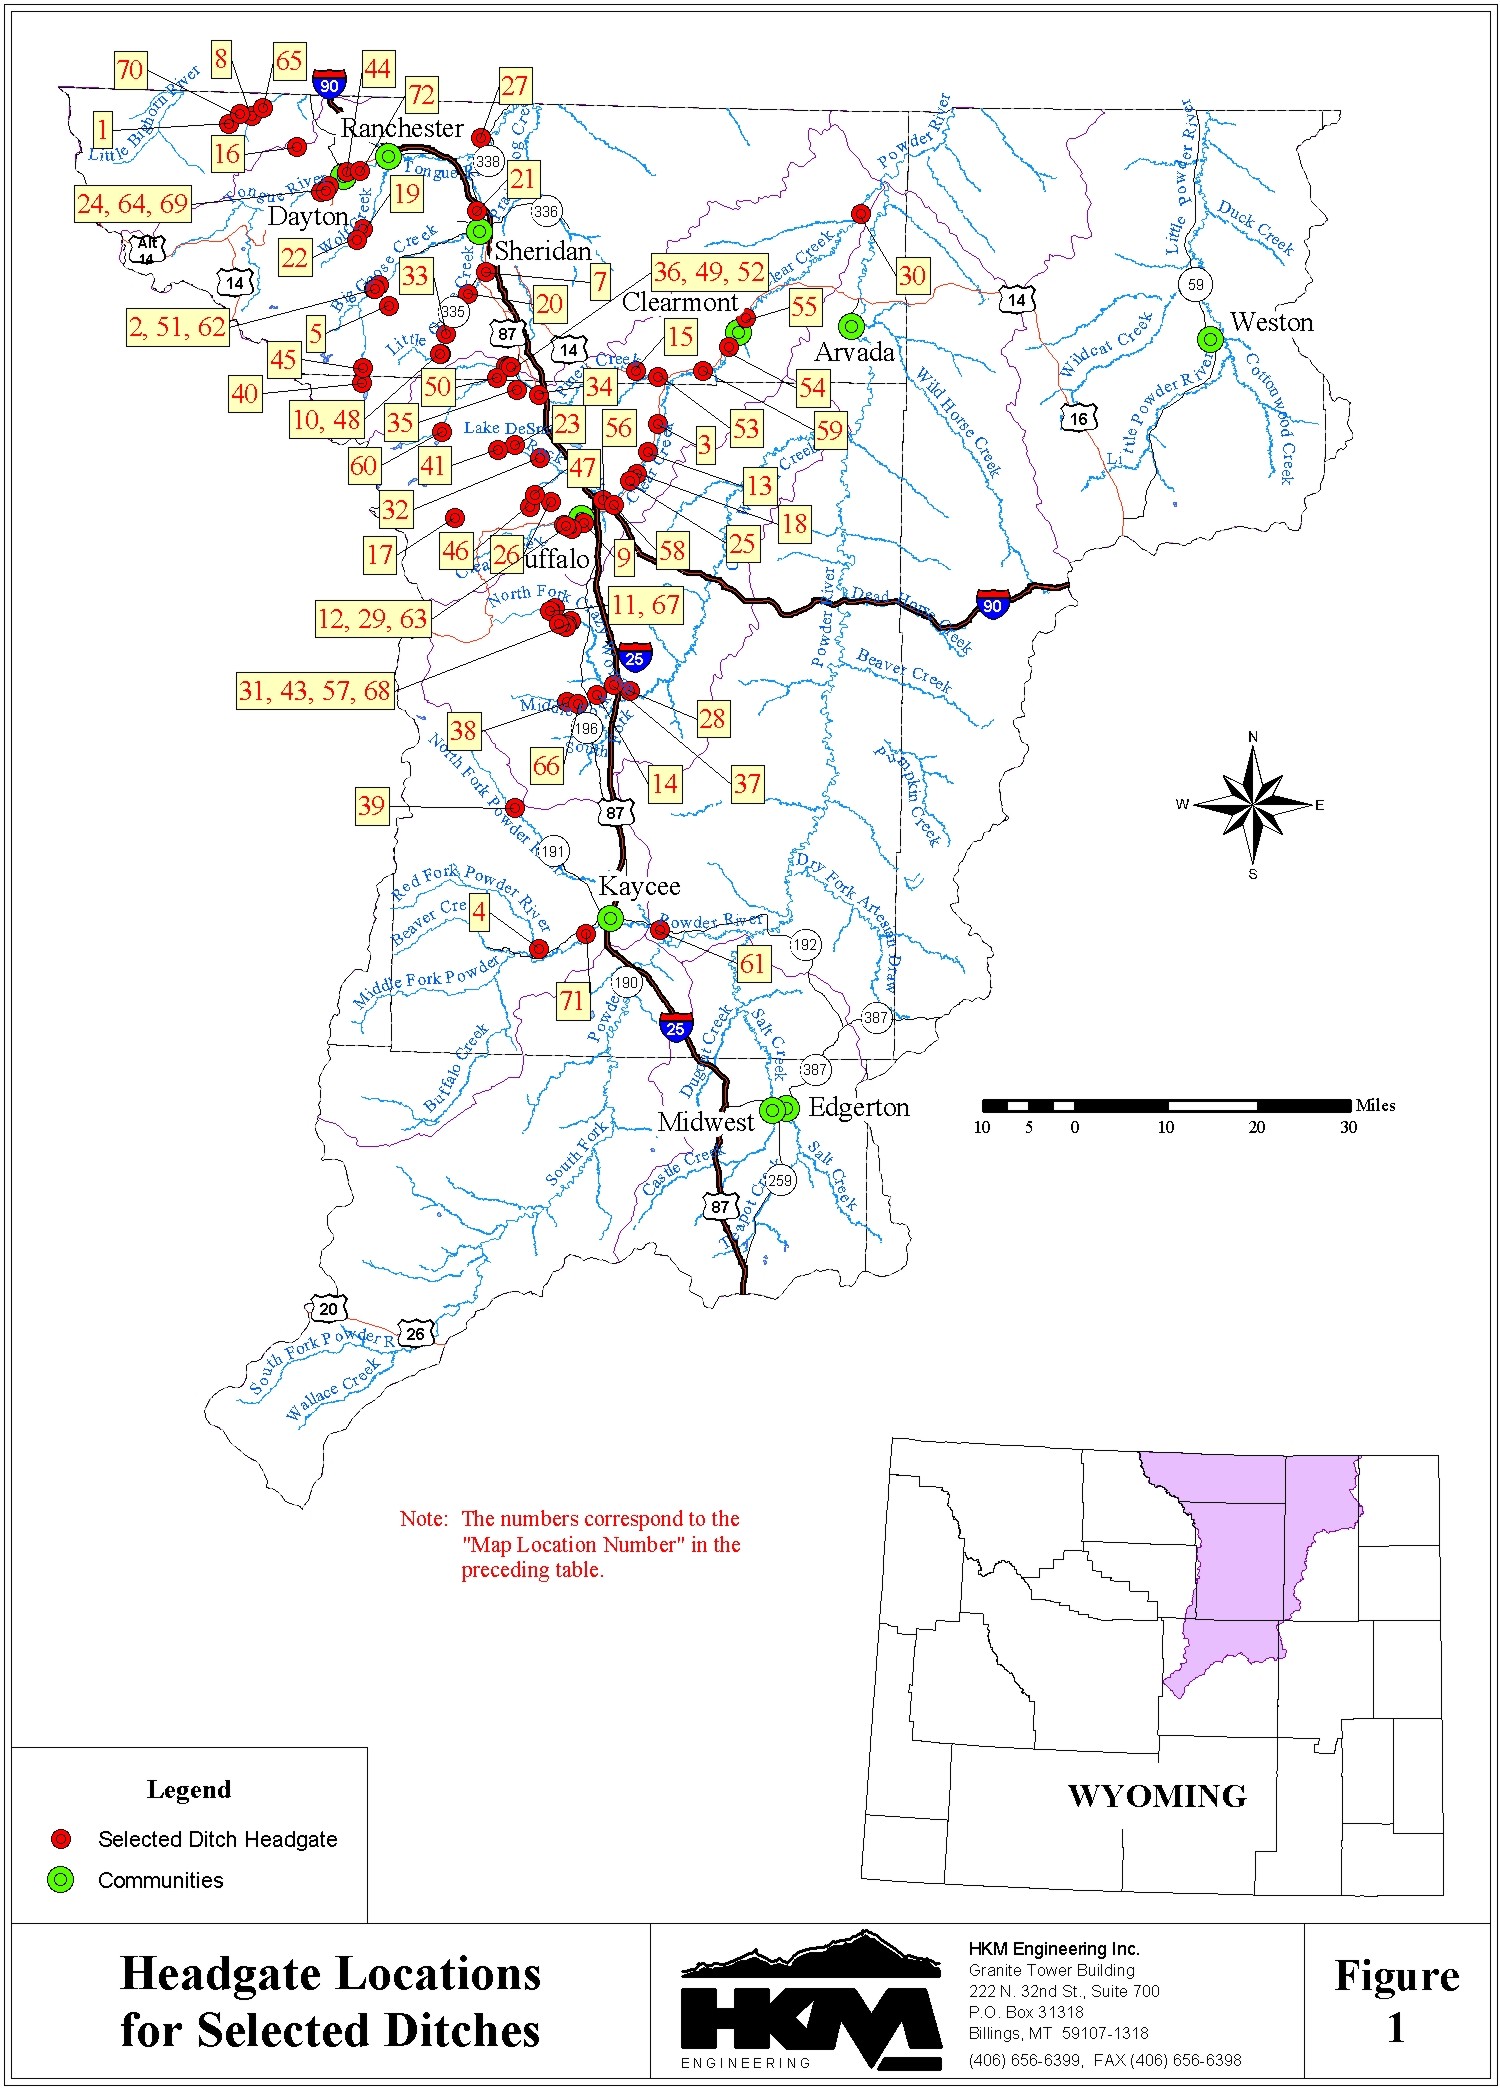 Headgate Locations for Selected Ditches, 
Powder/Tongue River Basin Plan